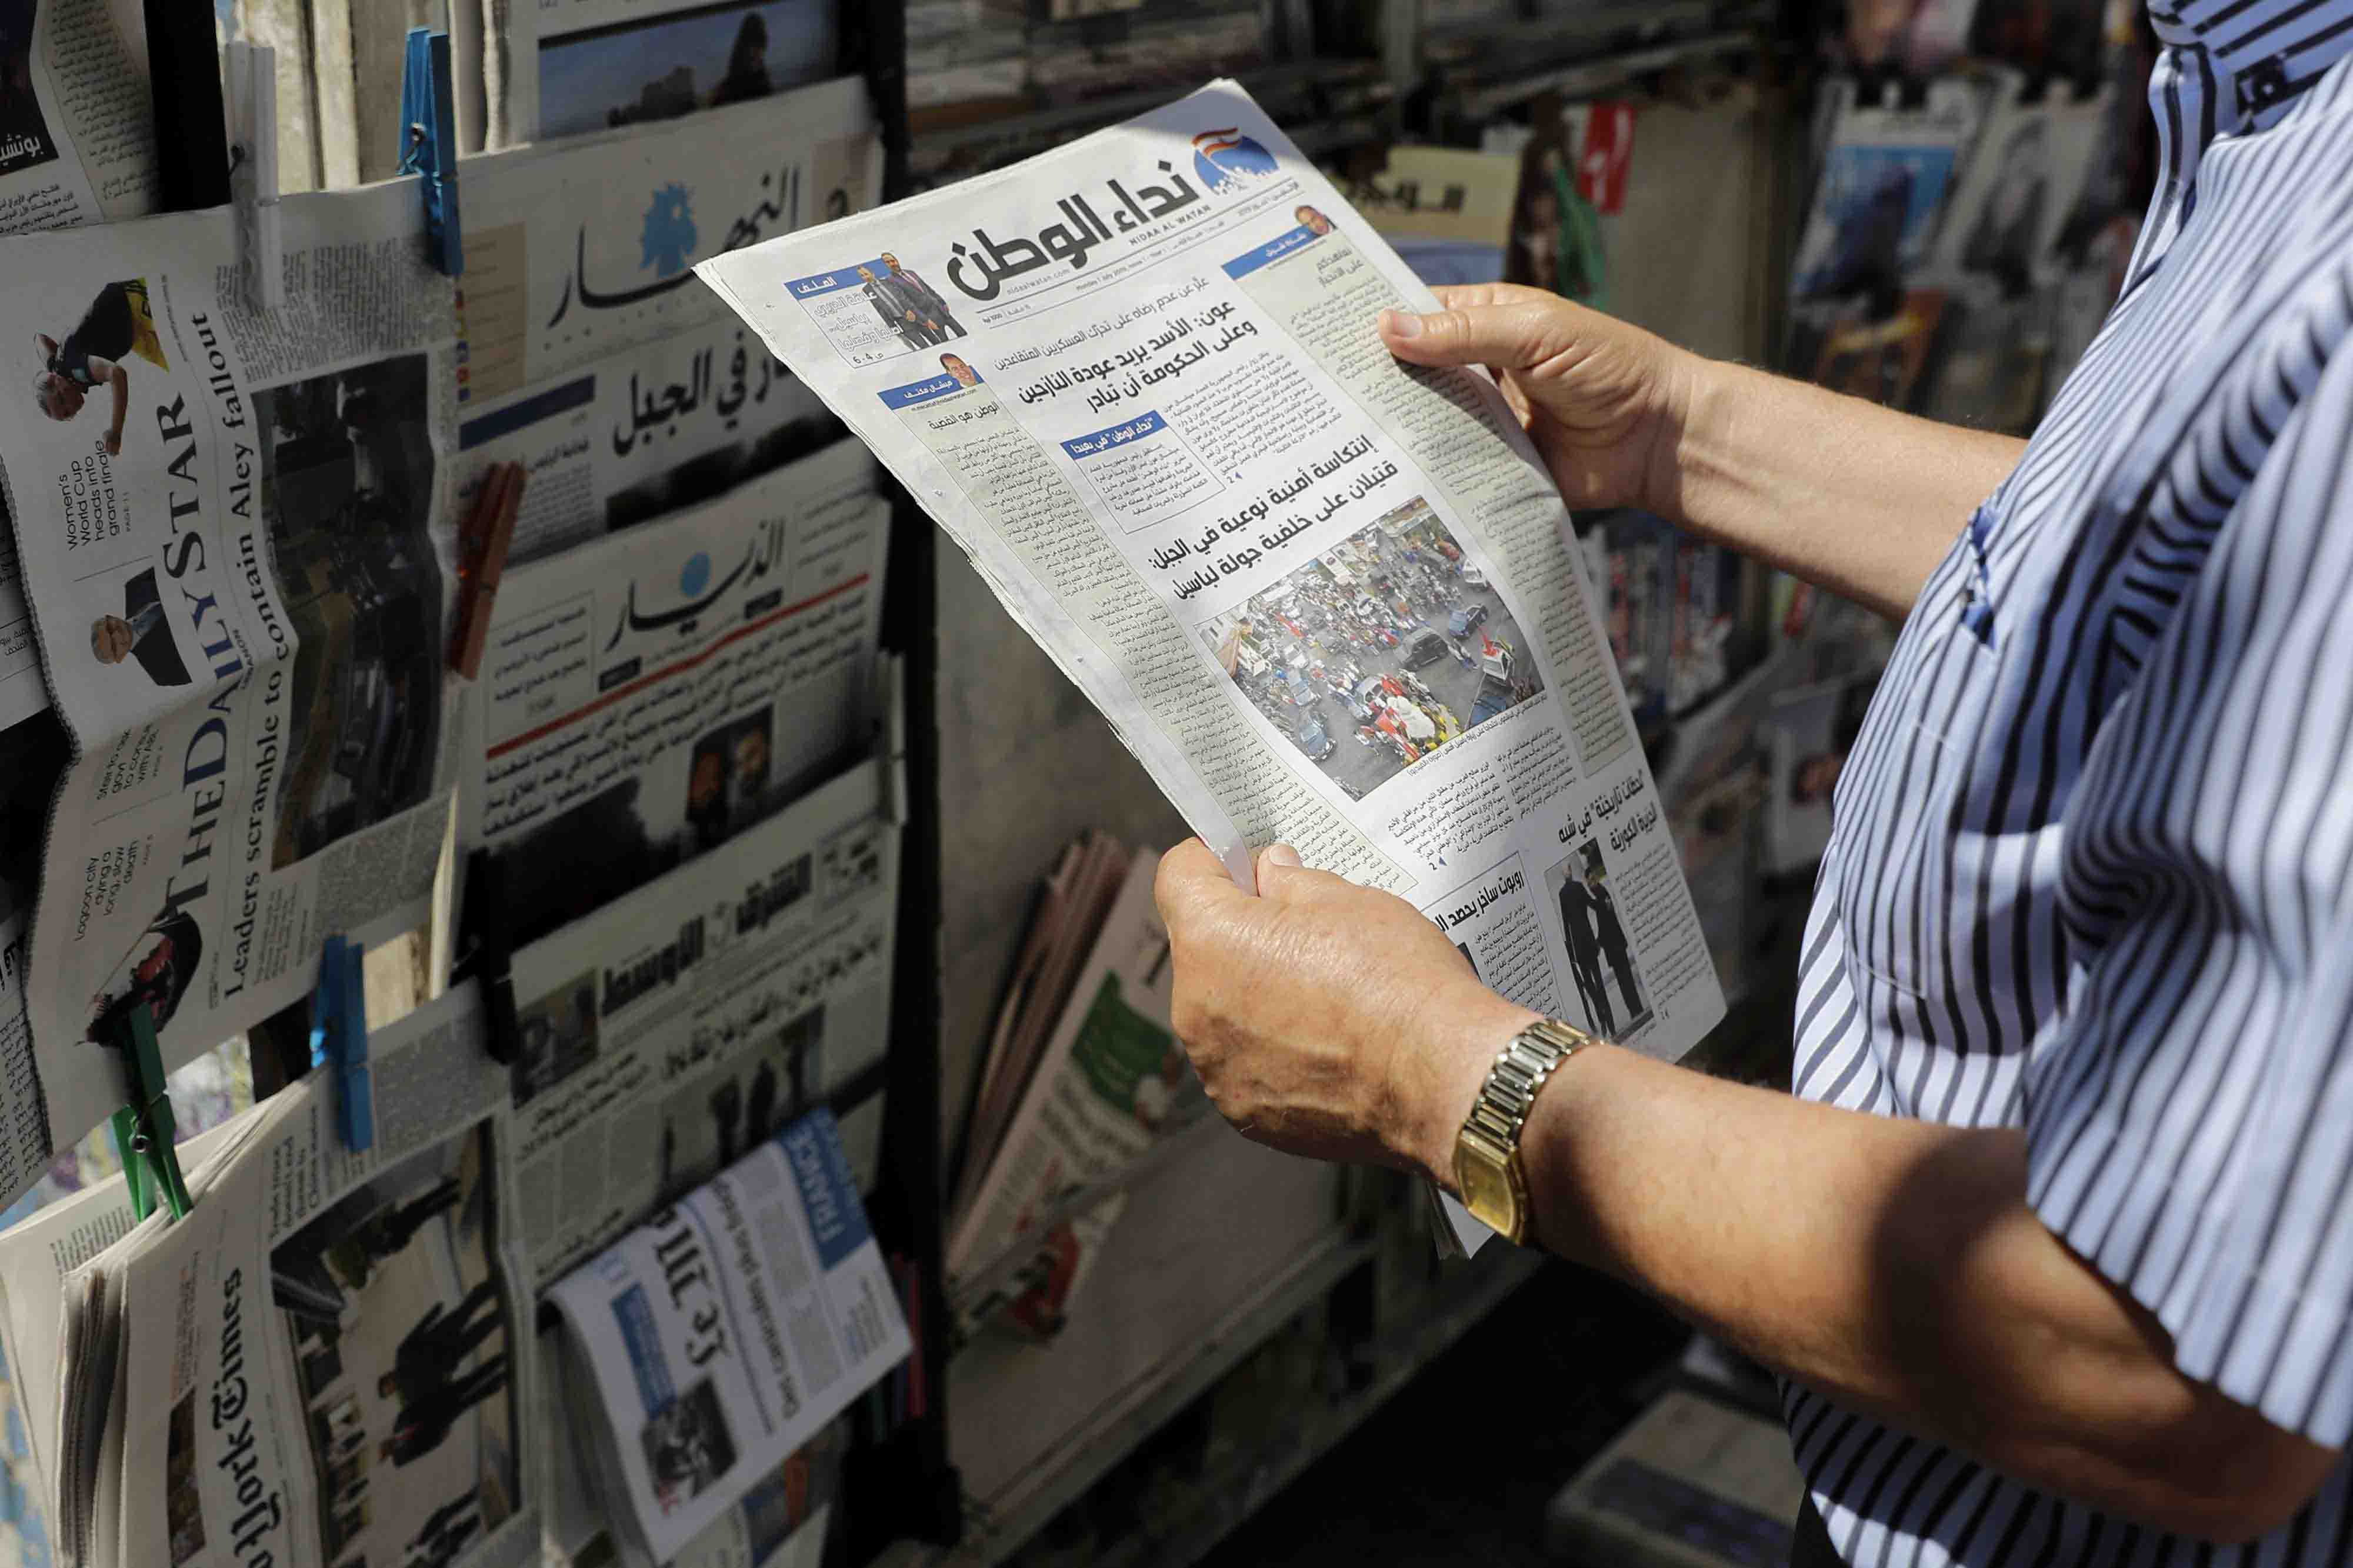 The launch of Nida Al-Watan comes during a time of crisis for Lebanon's print media